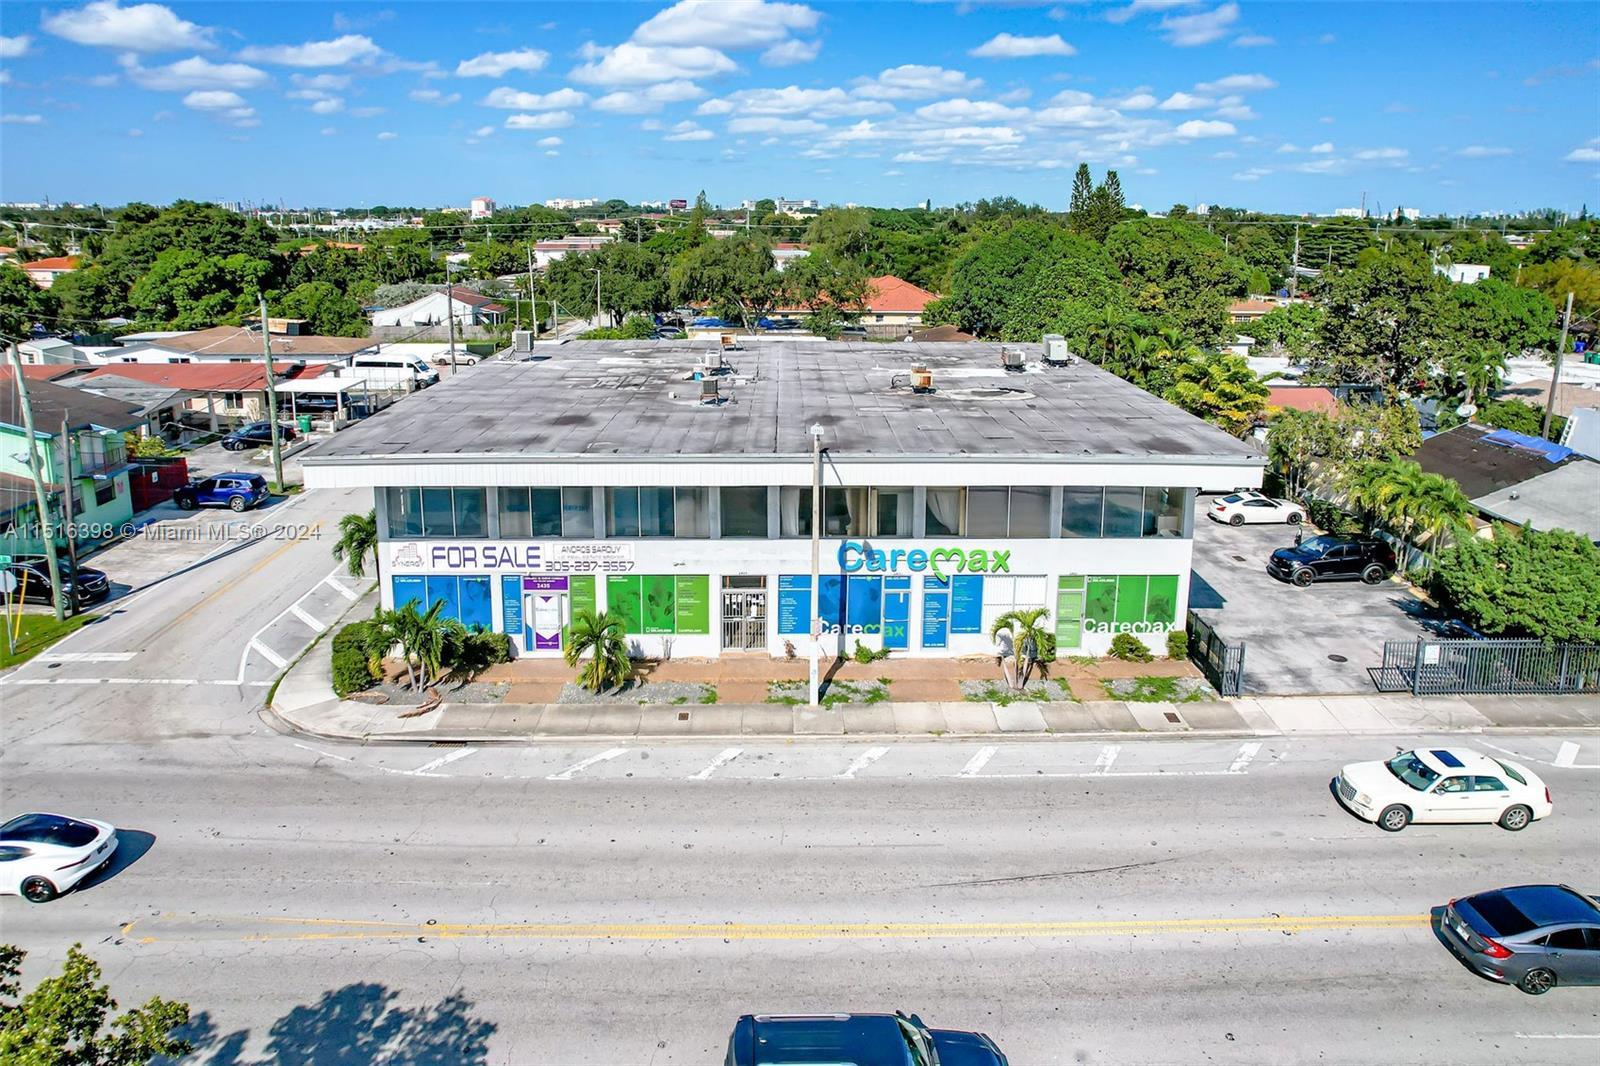 Photo of 2433 NW 7th St in Miami, FL